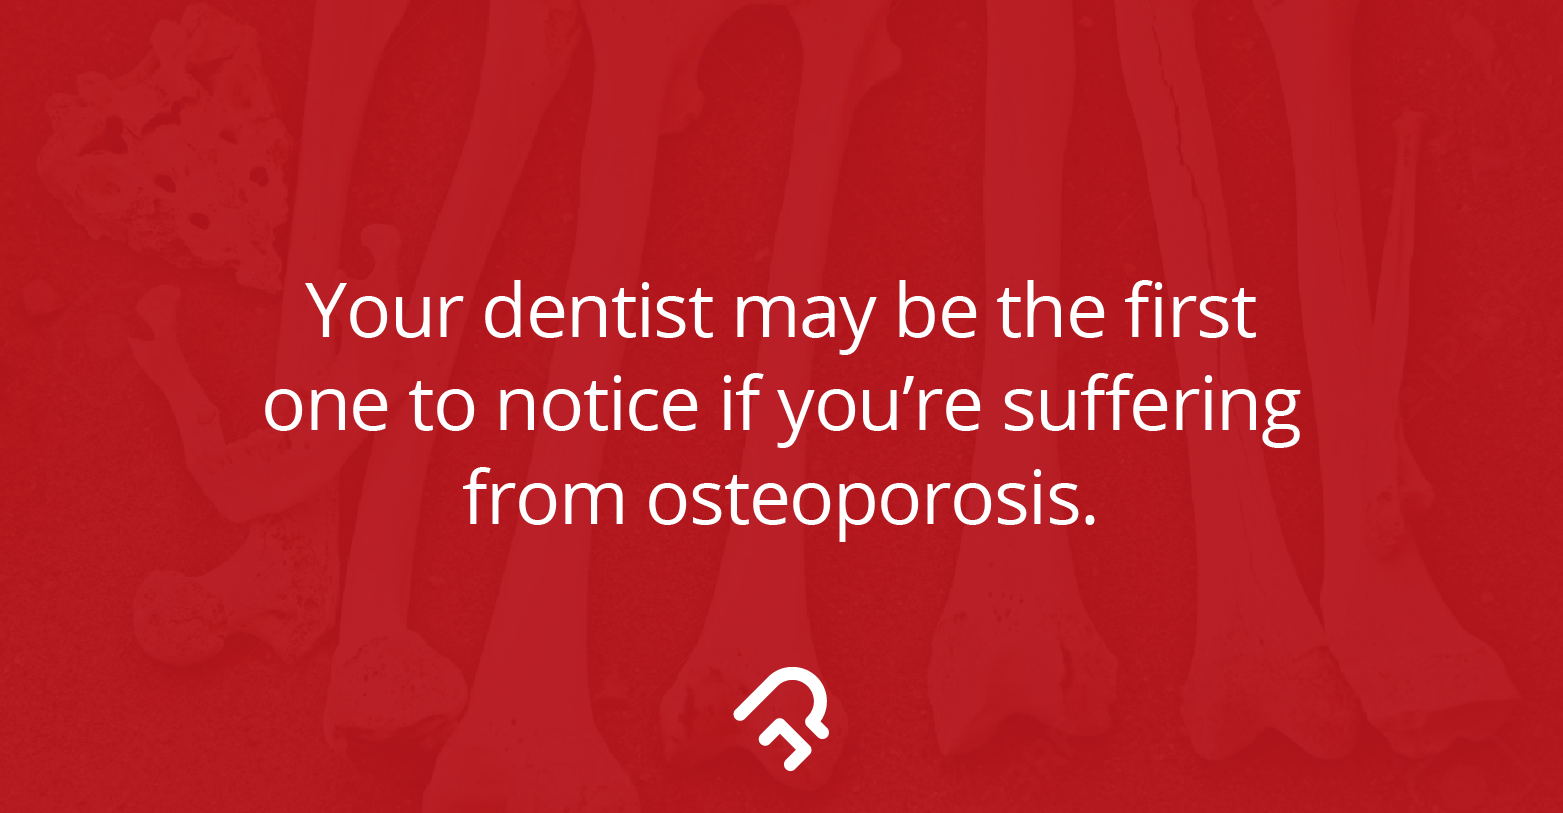 Dealing with Osteoporosis